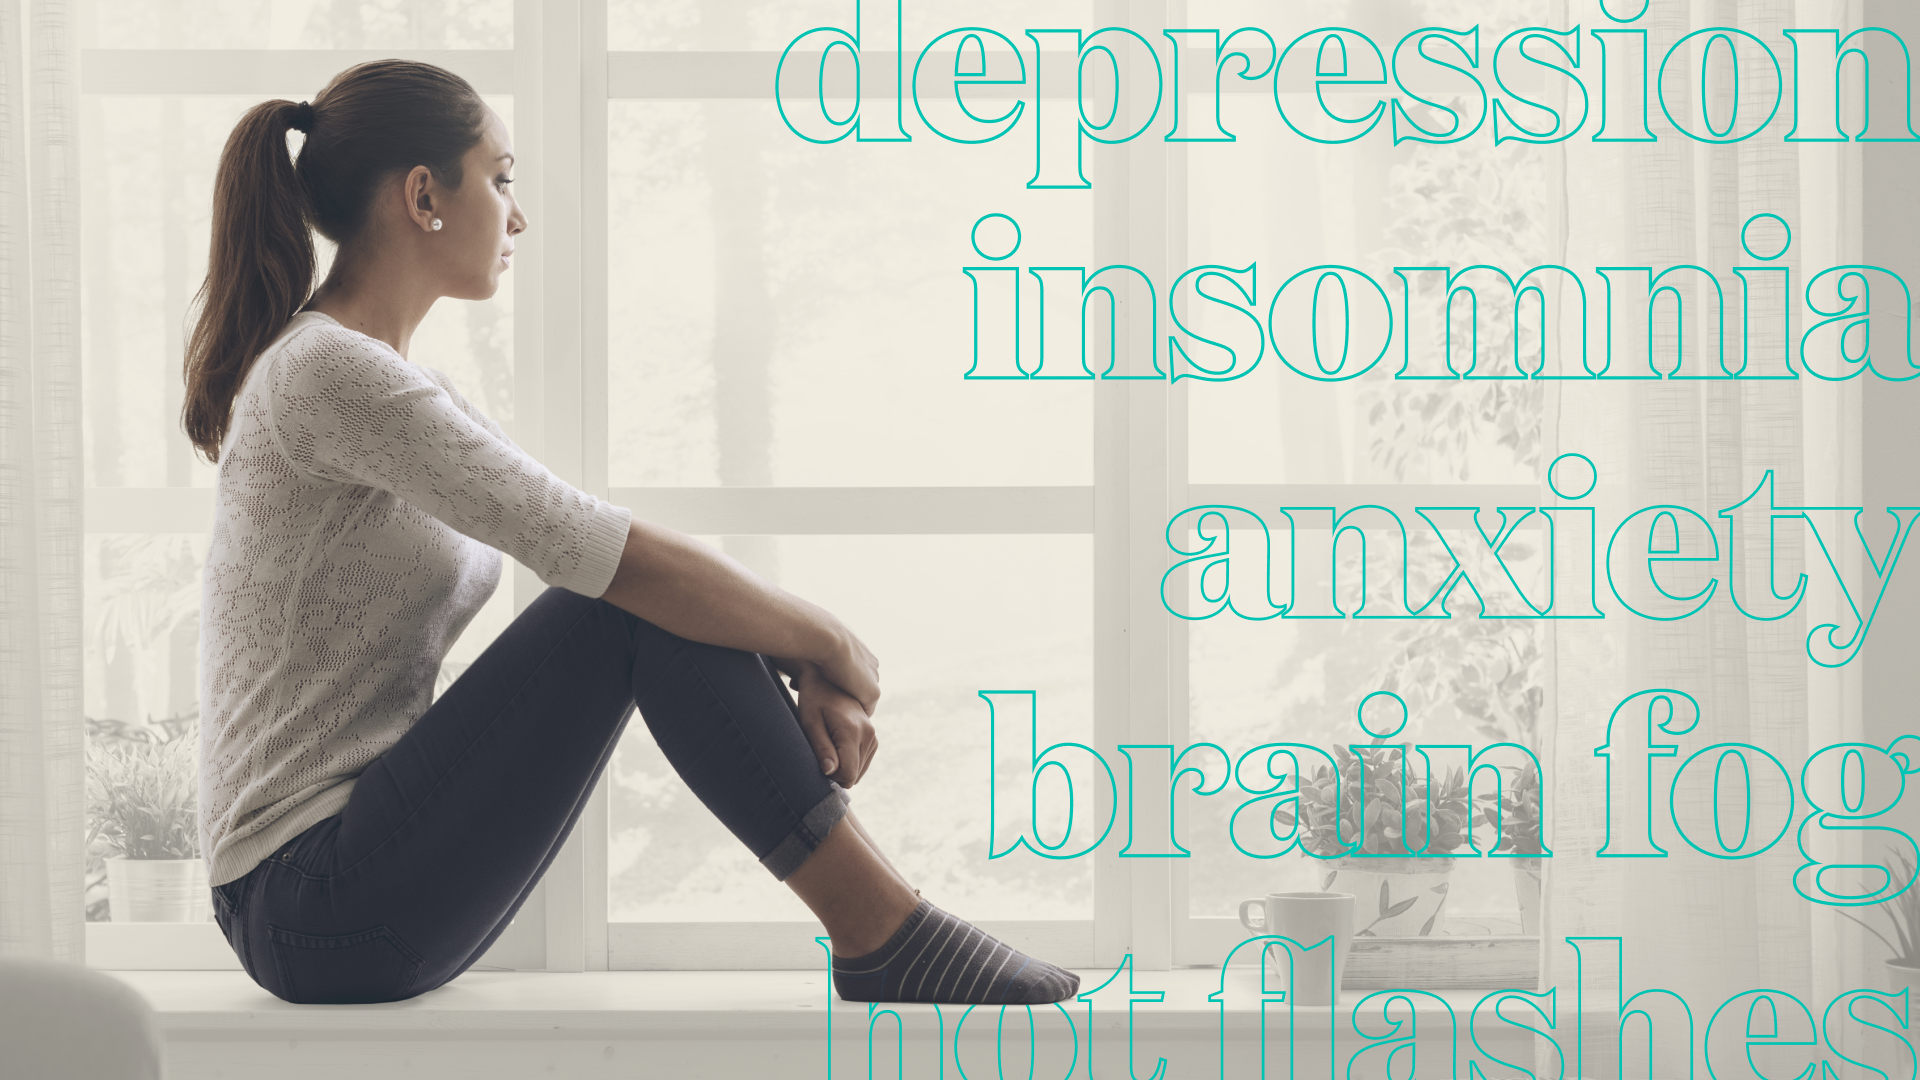 A woman looks out the window and symptoms of perimenopause appear in front of her: depression, insomnia, anxiety, brain fog, and hot flashes